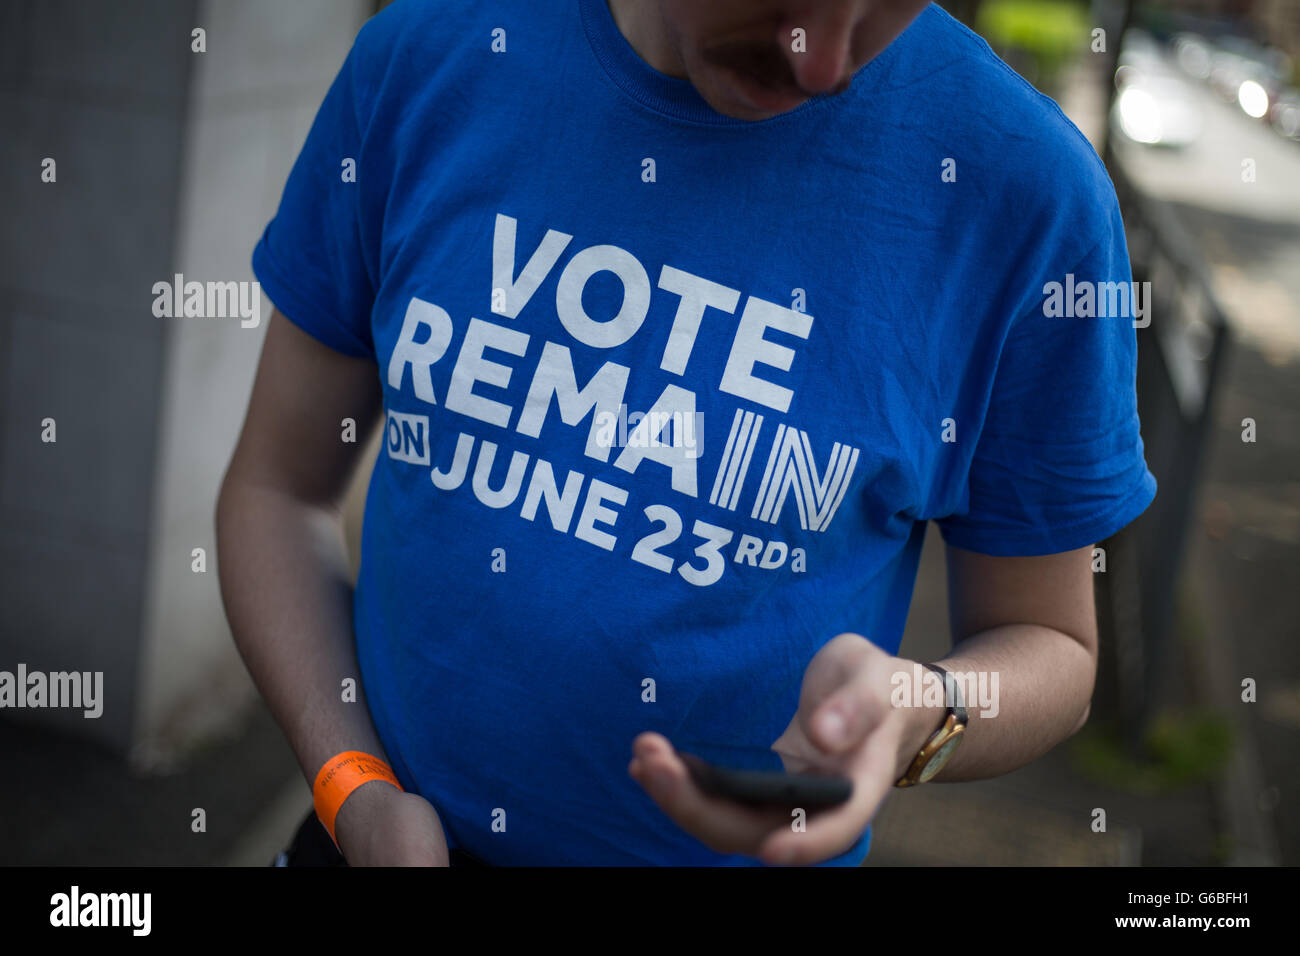 Glasgow, UK. 23rd June, 2016. 'Remain' campaigners stand distributing leaflets, as voting takes place on the United Kingdom's referendum on European Union membership, outside the Hyndland Primary School voting station in Partick, in Glasgow, Scotland, on 23 June 2016. Credit:  jeremy sutton-hibbert/Alamy Live News Stock Photo